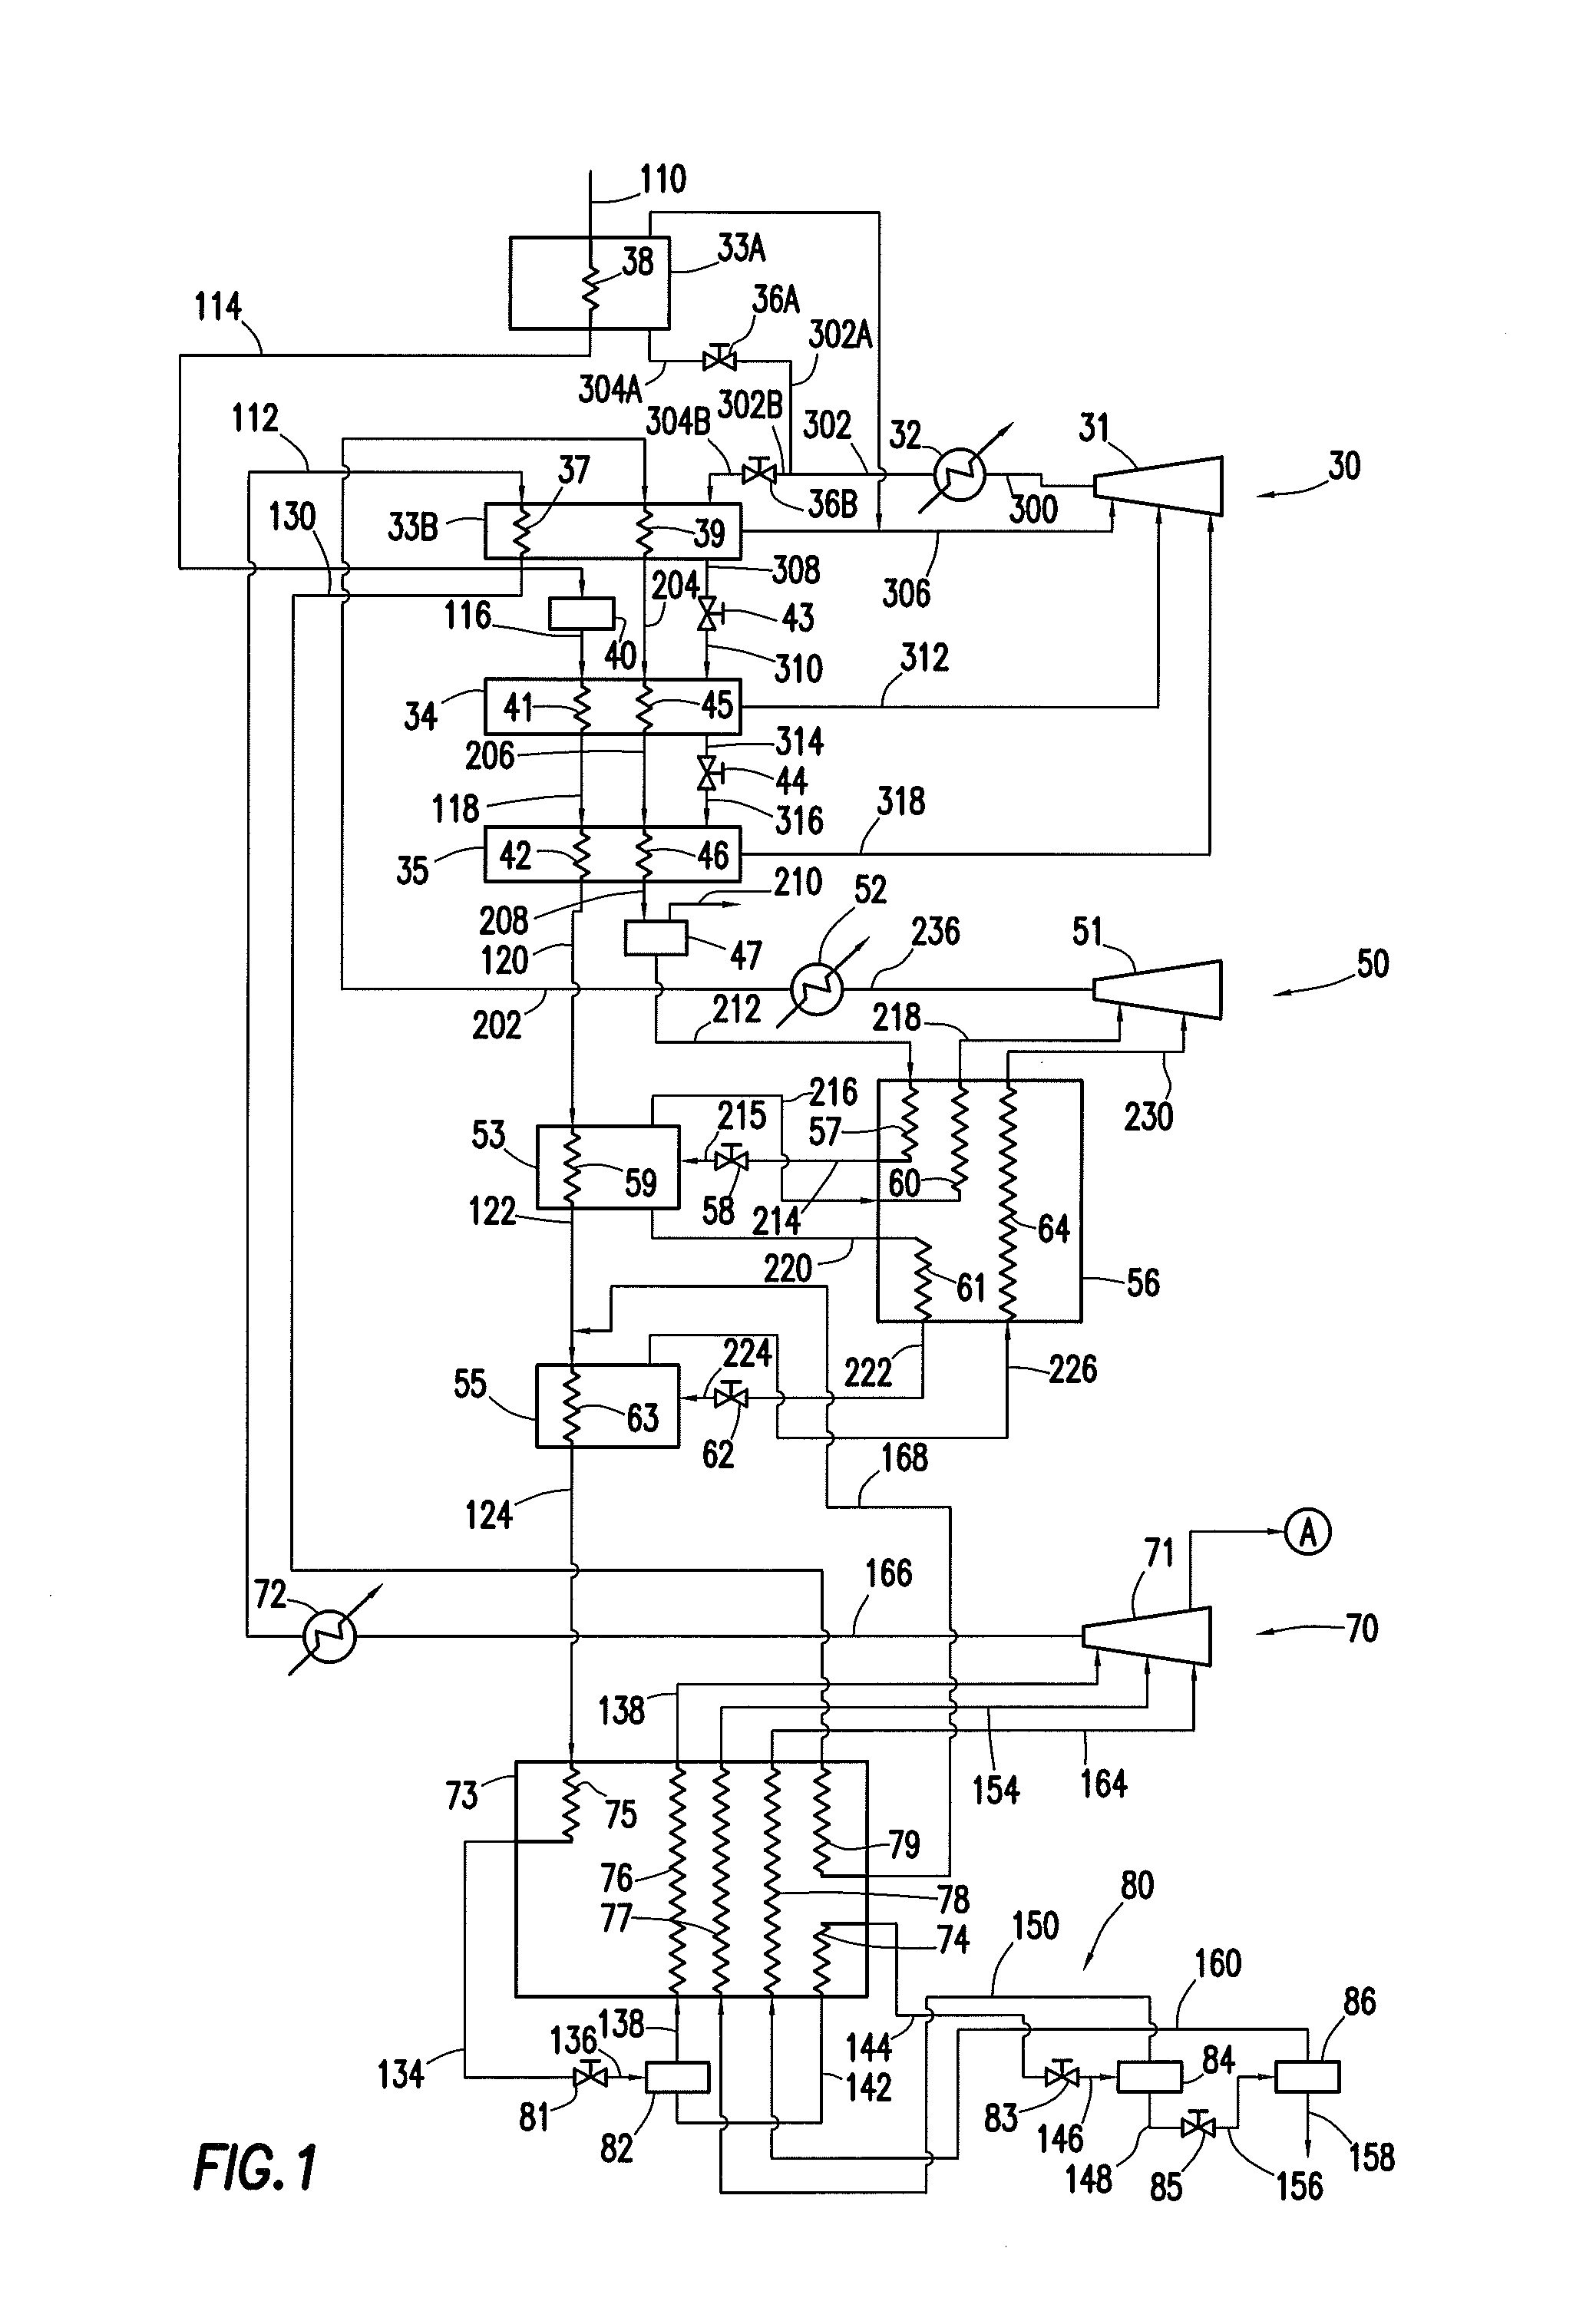 Integrated cascade process for vaporization and recovery of residual LNG in a floating tank application